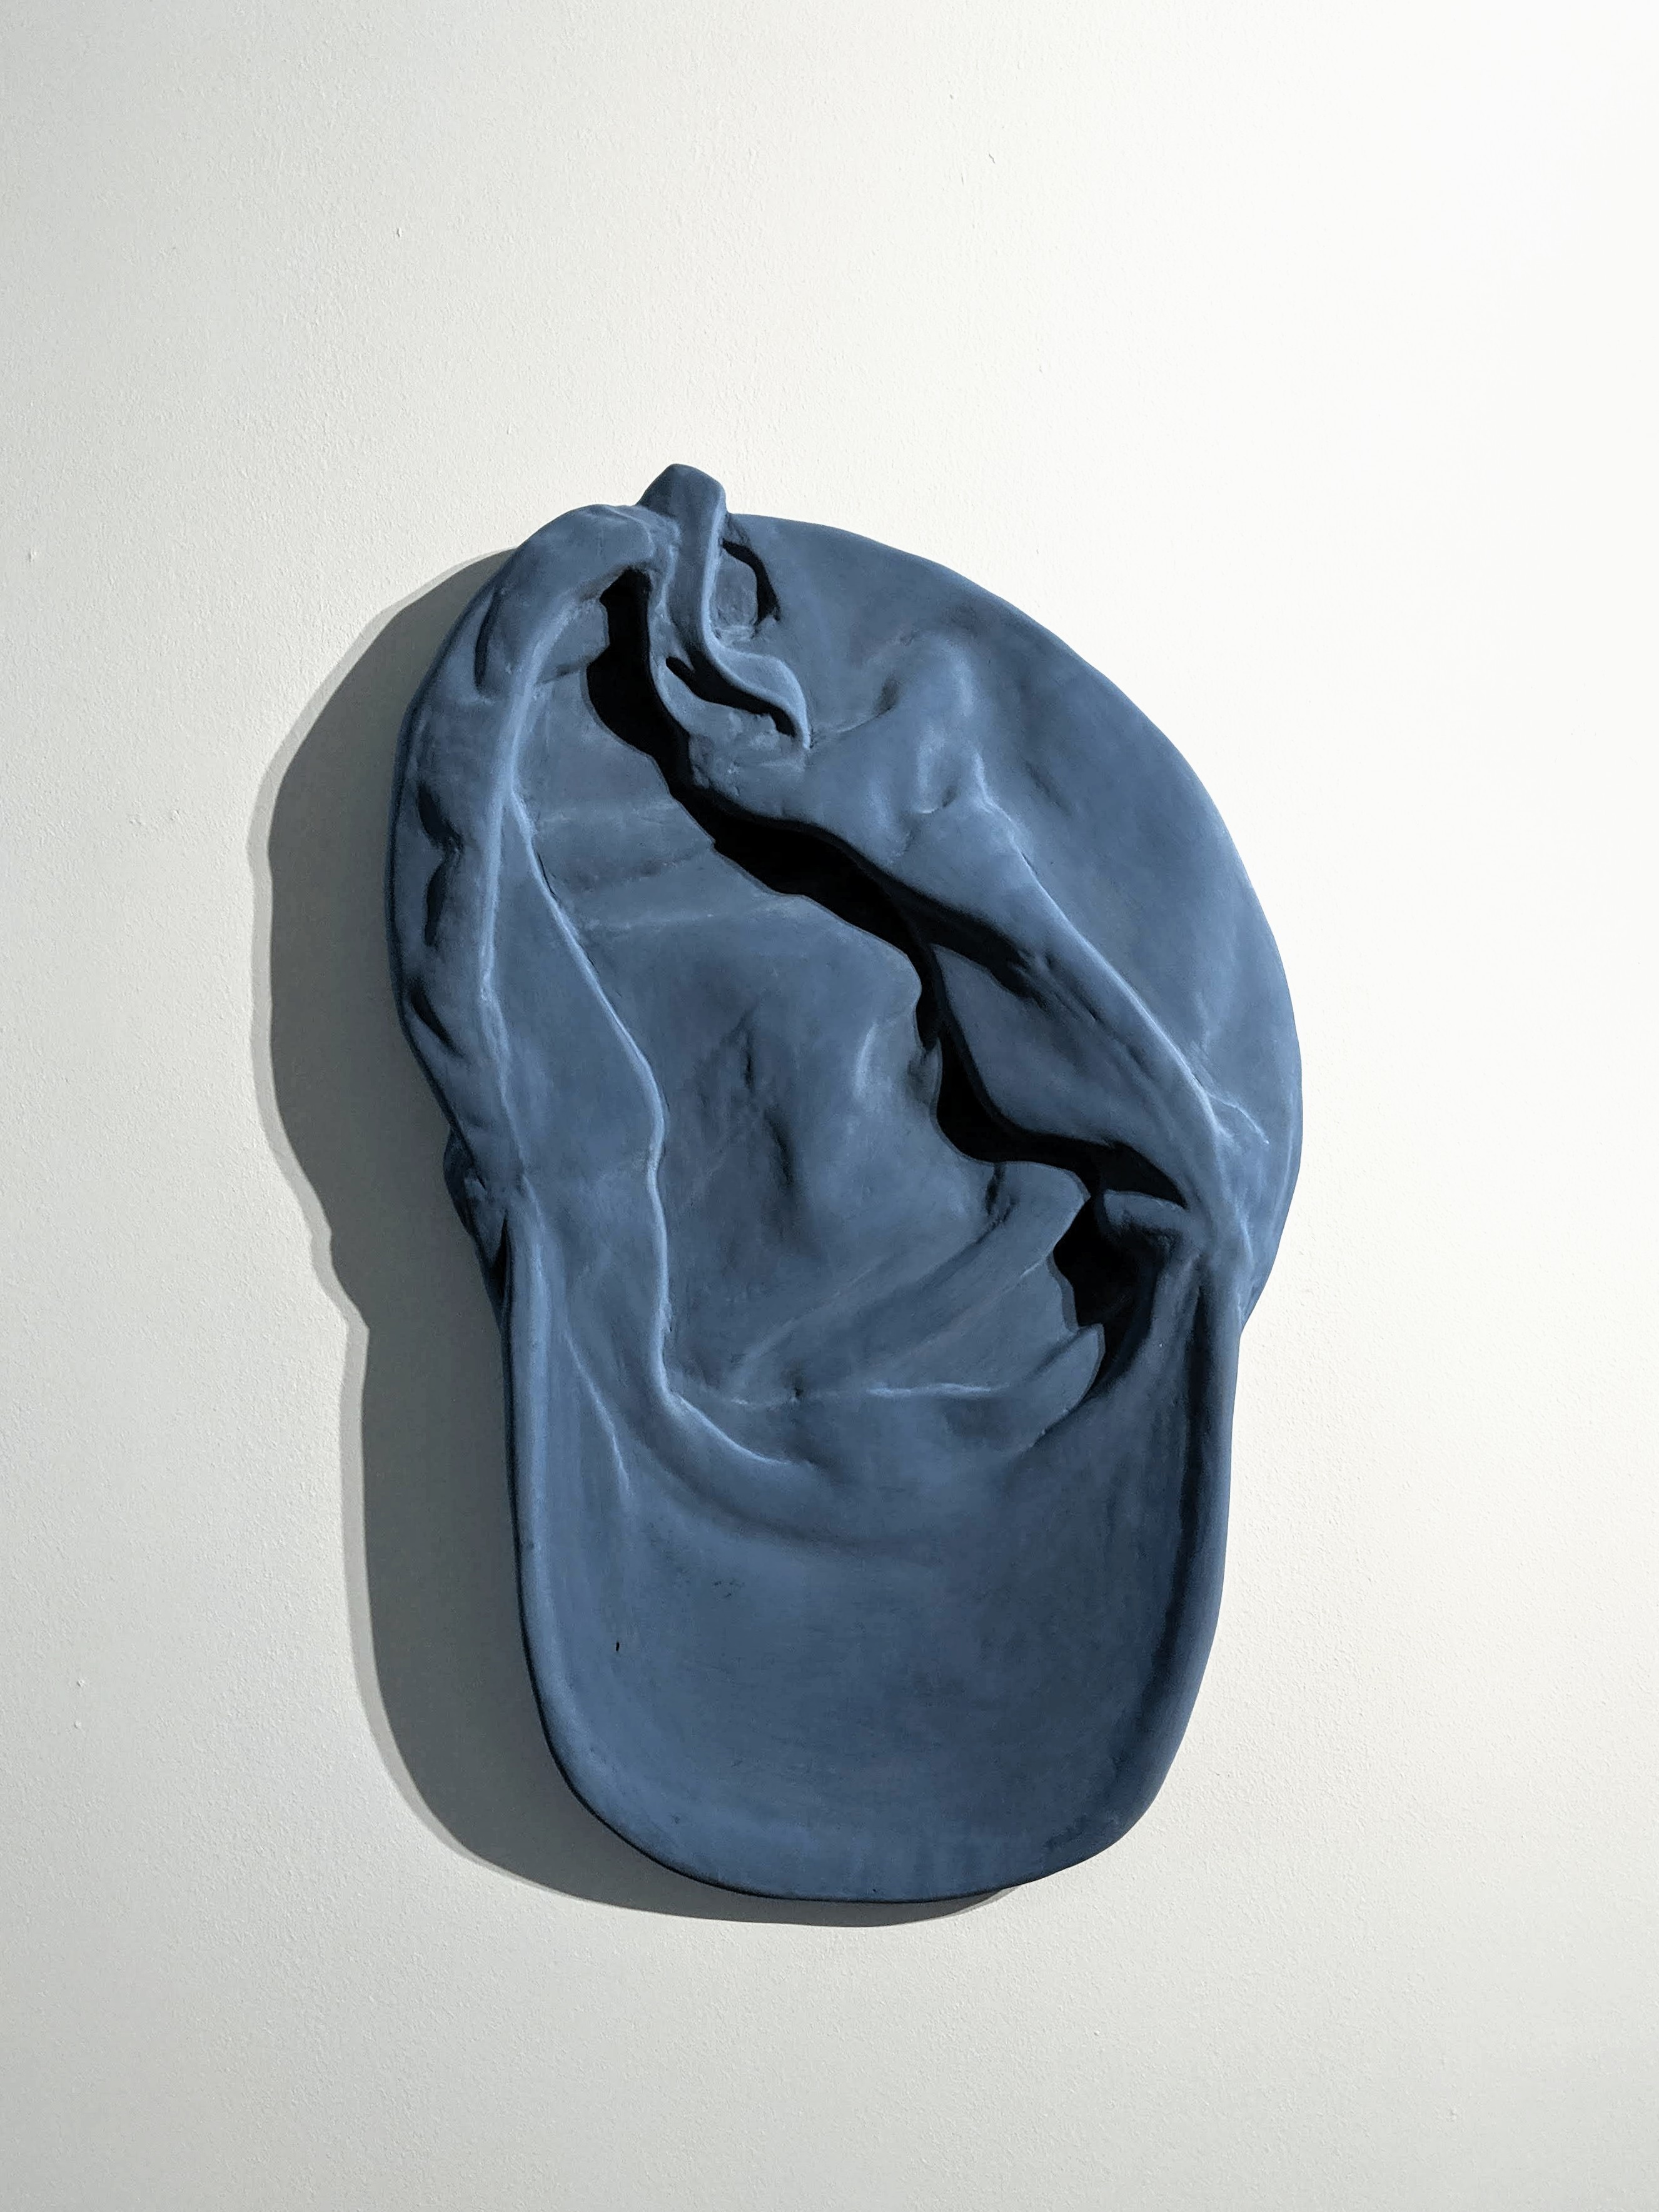 Raymond Padrón, Dad Hat, photogrammetric scan, CNC milled, hand carved, and painted soft maple, 35 x 28 x 2 inches, 2019